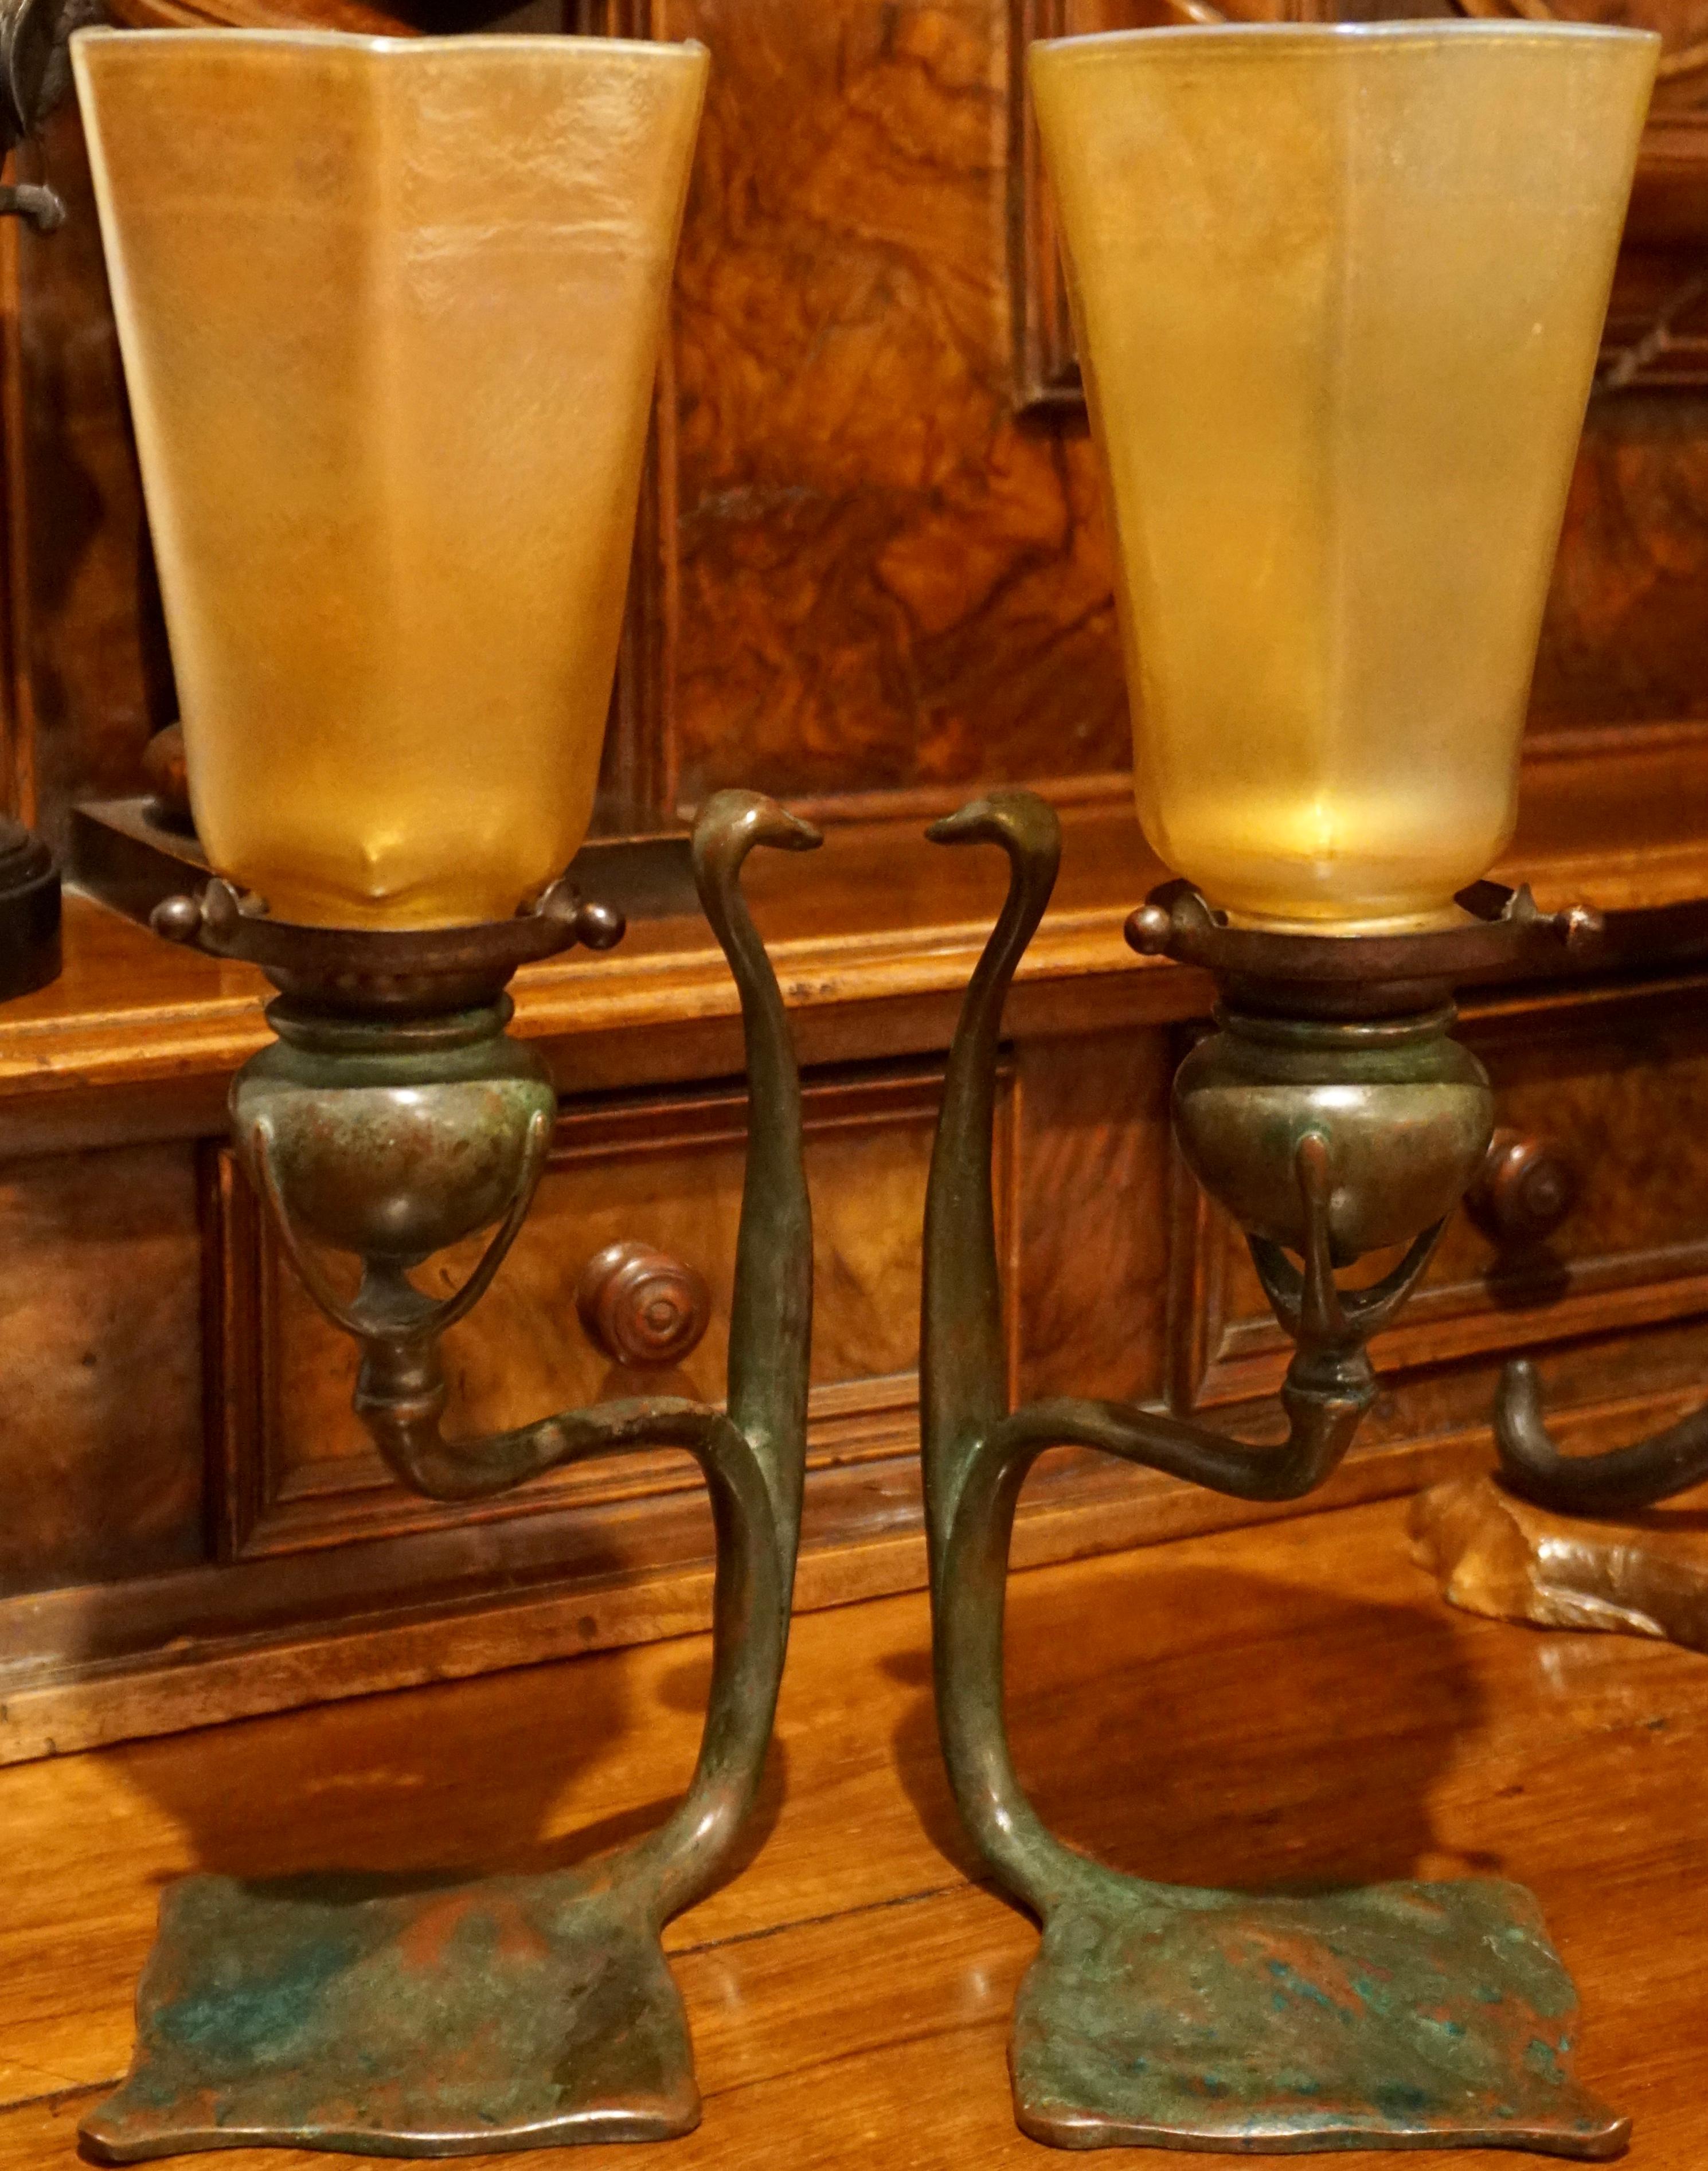 A rare pair Tiffany Studios cobra bronze candlesticks with L.C.T. Favrile lamp shades. Absolutely beautiful green, red and brown patina with no issues; just age. The gold Favrile signed L.C.T. Glass shades could not be matched more perfectly.